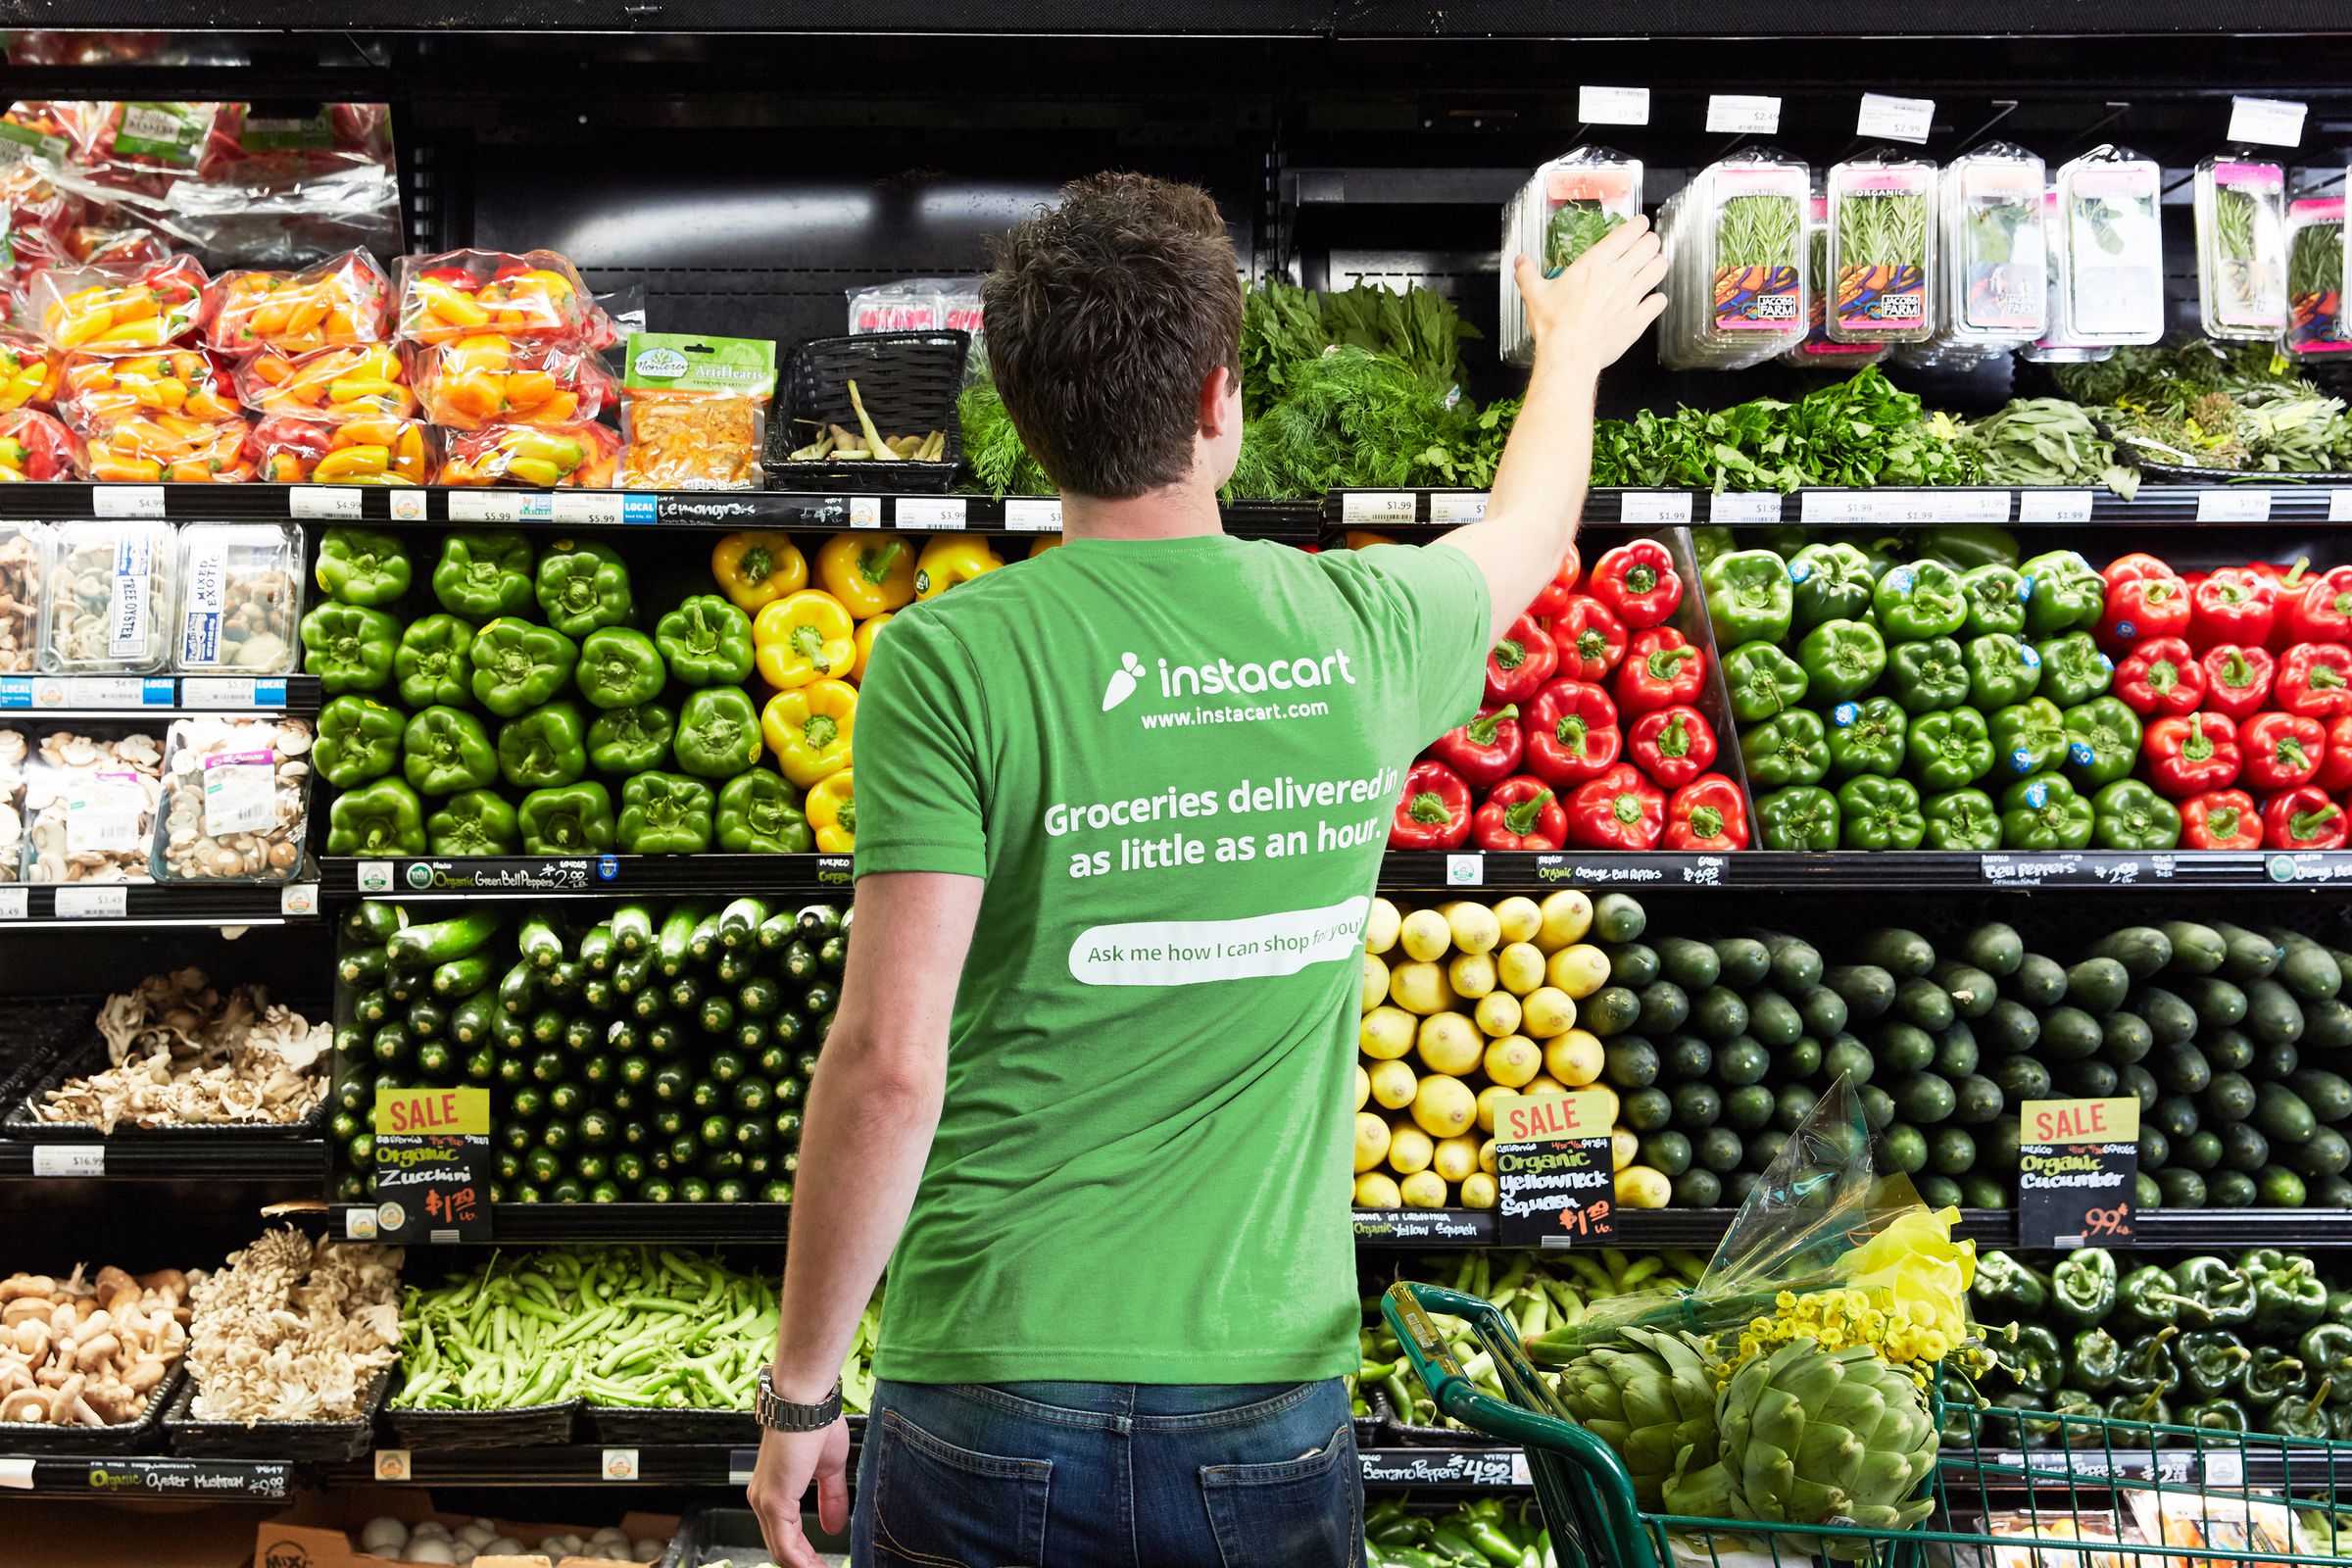 An Instacart shopper chooses items for a grocery order.